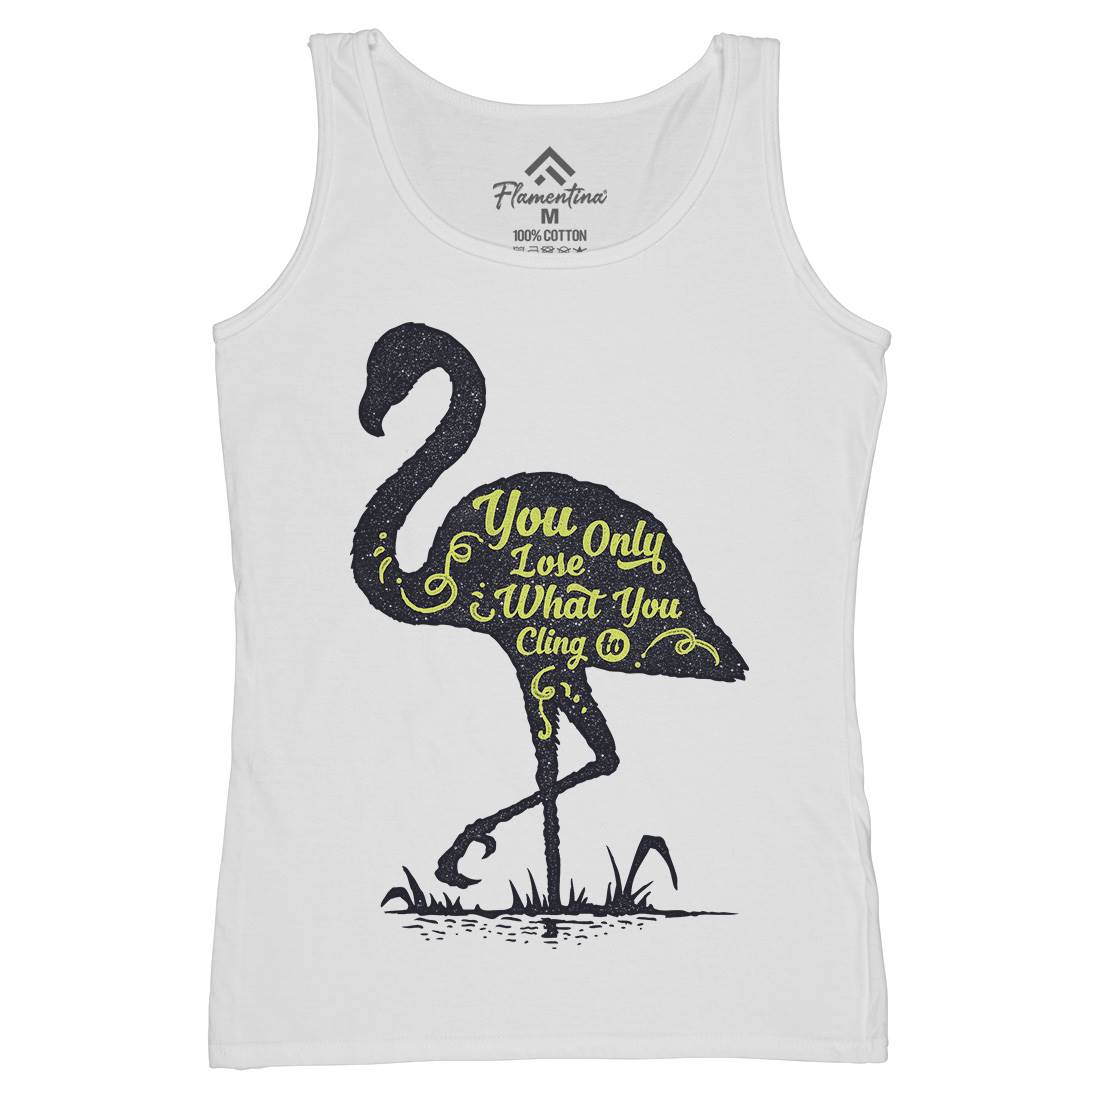 You Only Lose Womens Organic Tank Top Vest Quotes A395